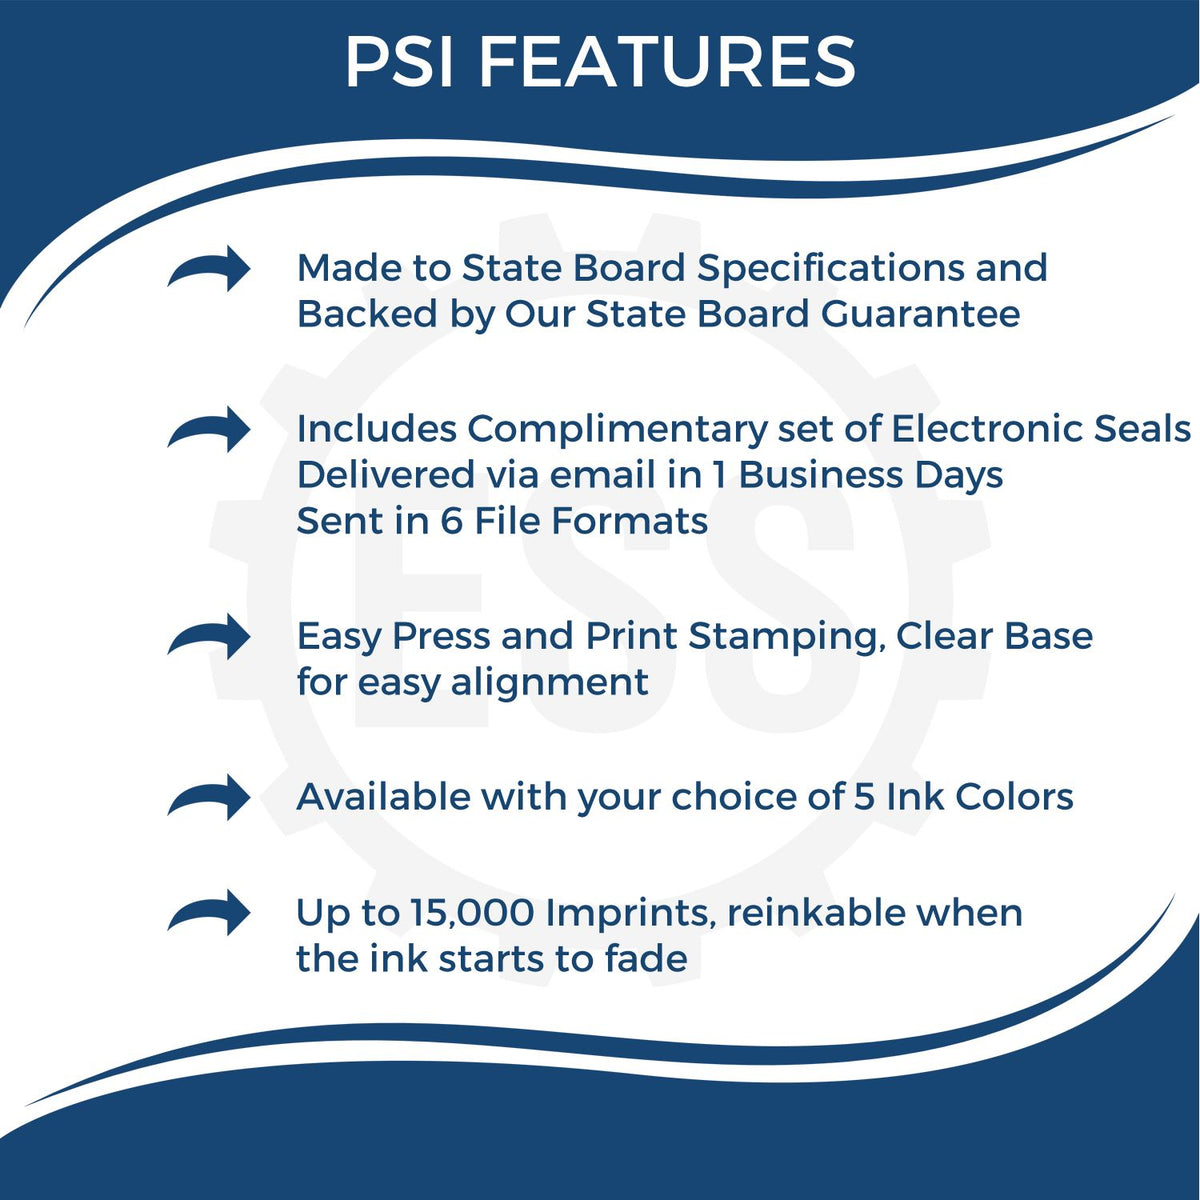 A picture of an infographic highlighting the selling points for the PSI Ohio Notary Stamp